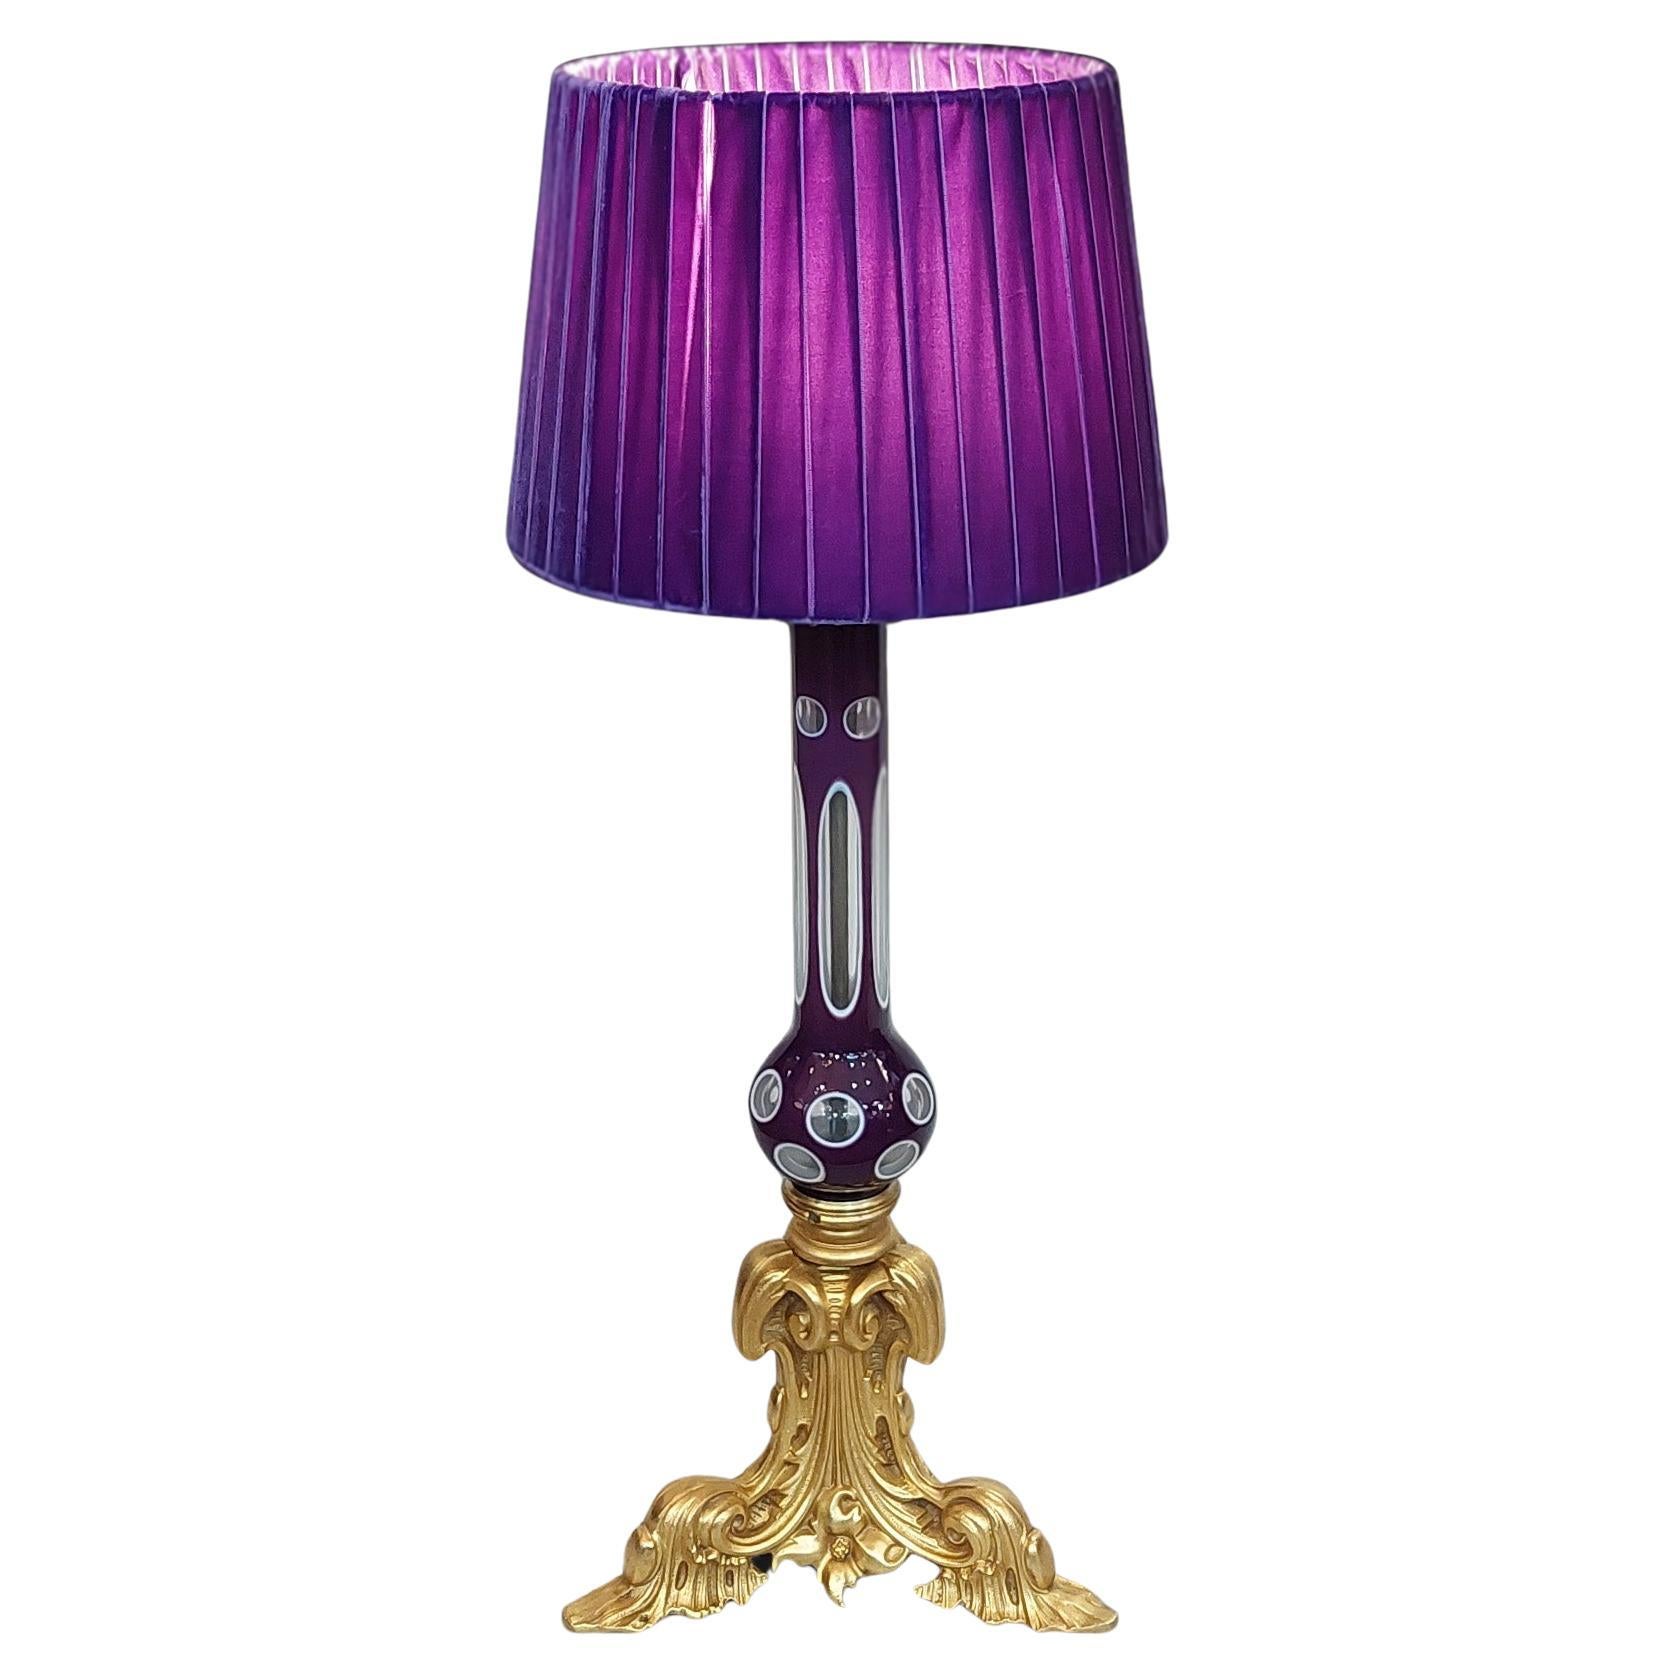 Early 20thC Gilt Bronze and Murano Glass Table Lamp